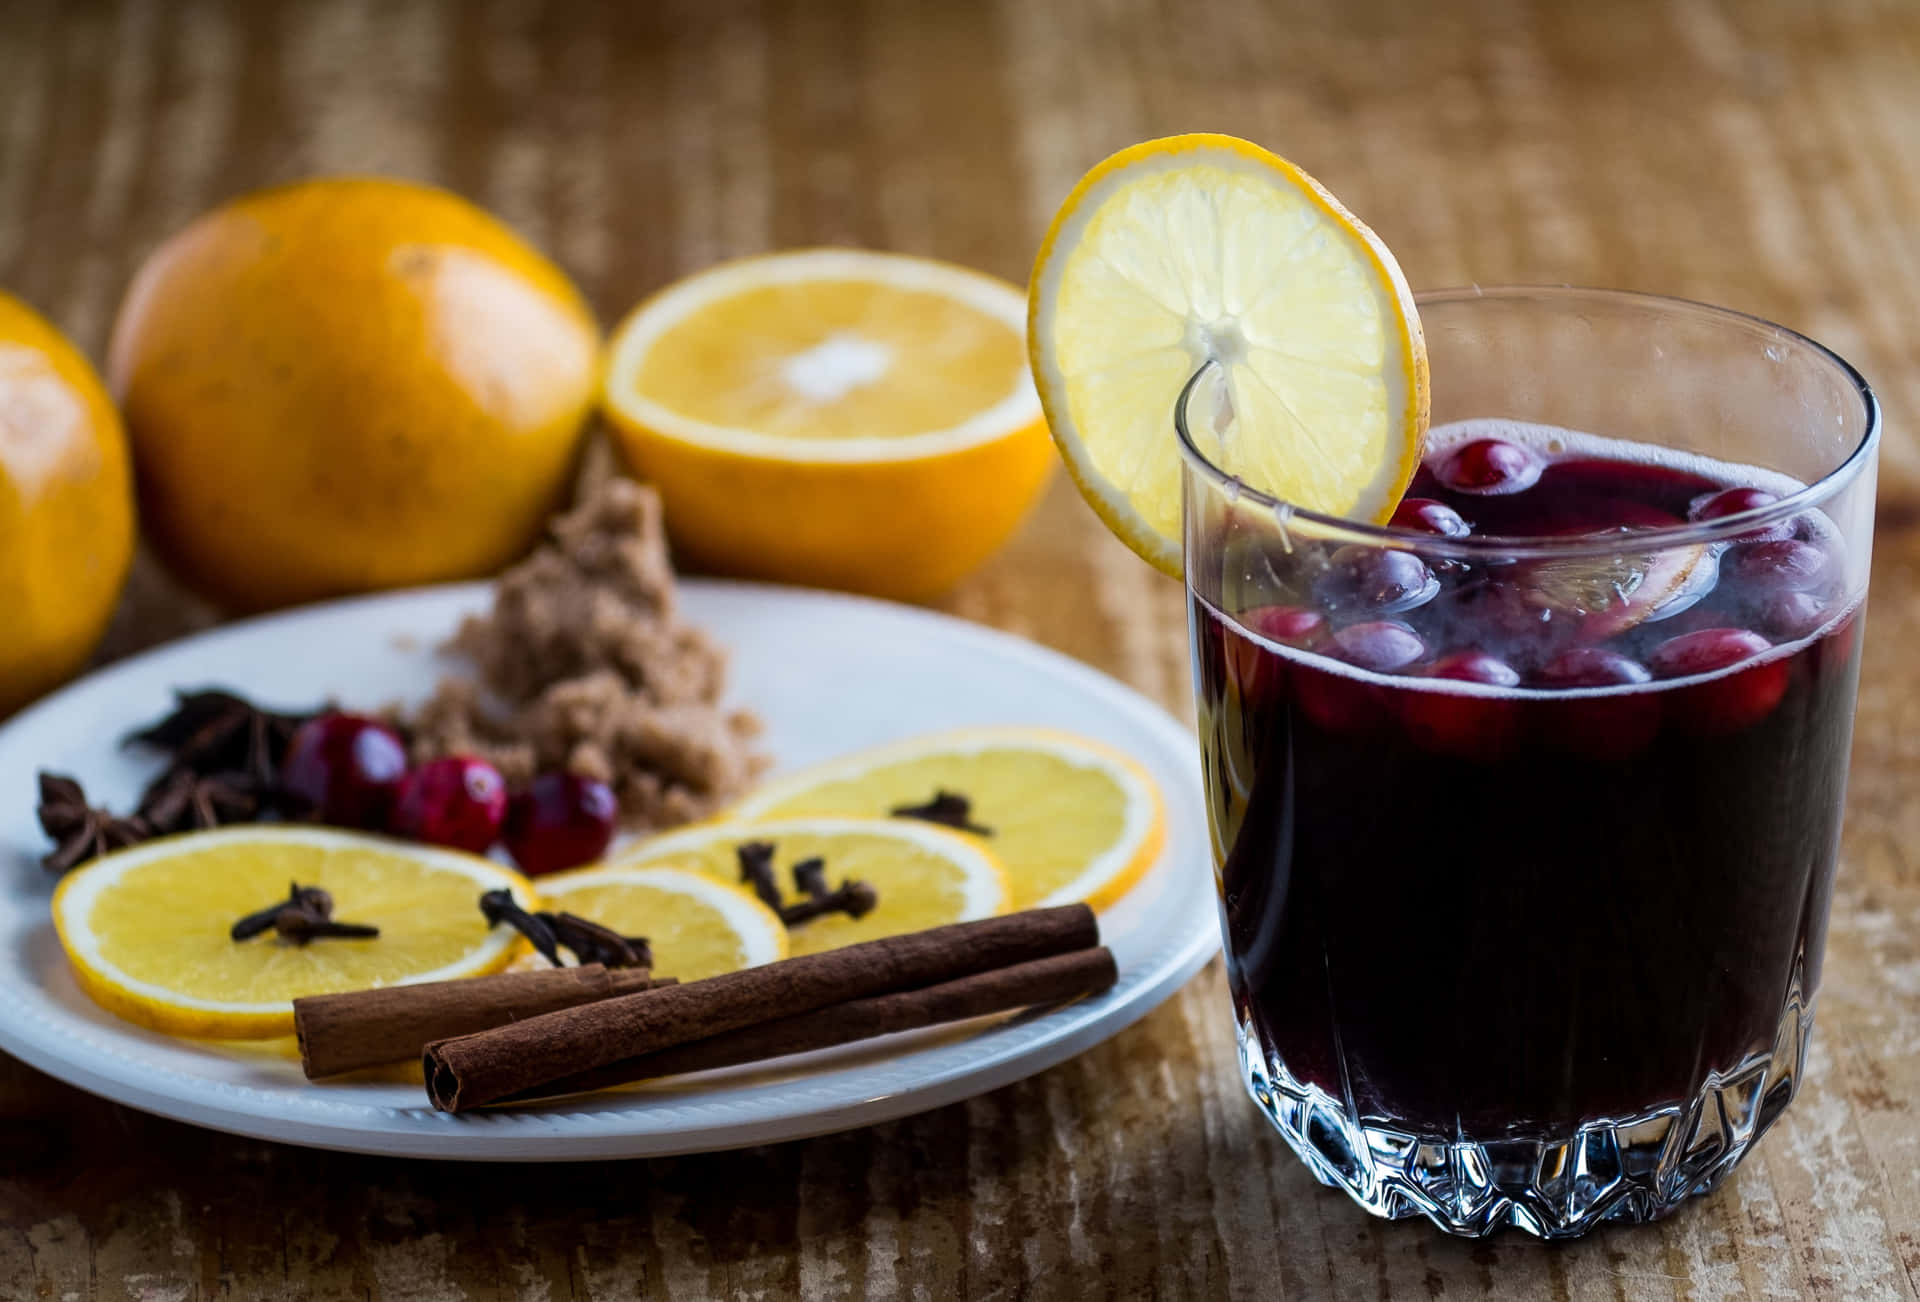 "Winter's Delight - A Glass of Aromatic Mulled Wine" Wallpaper